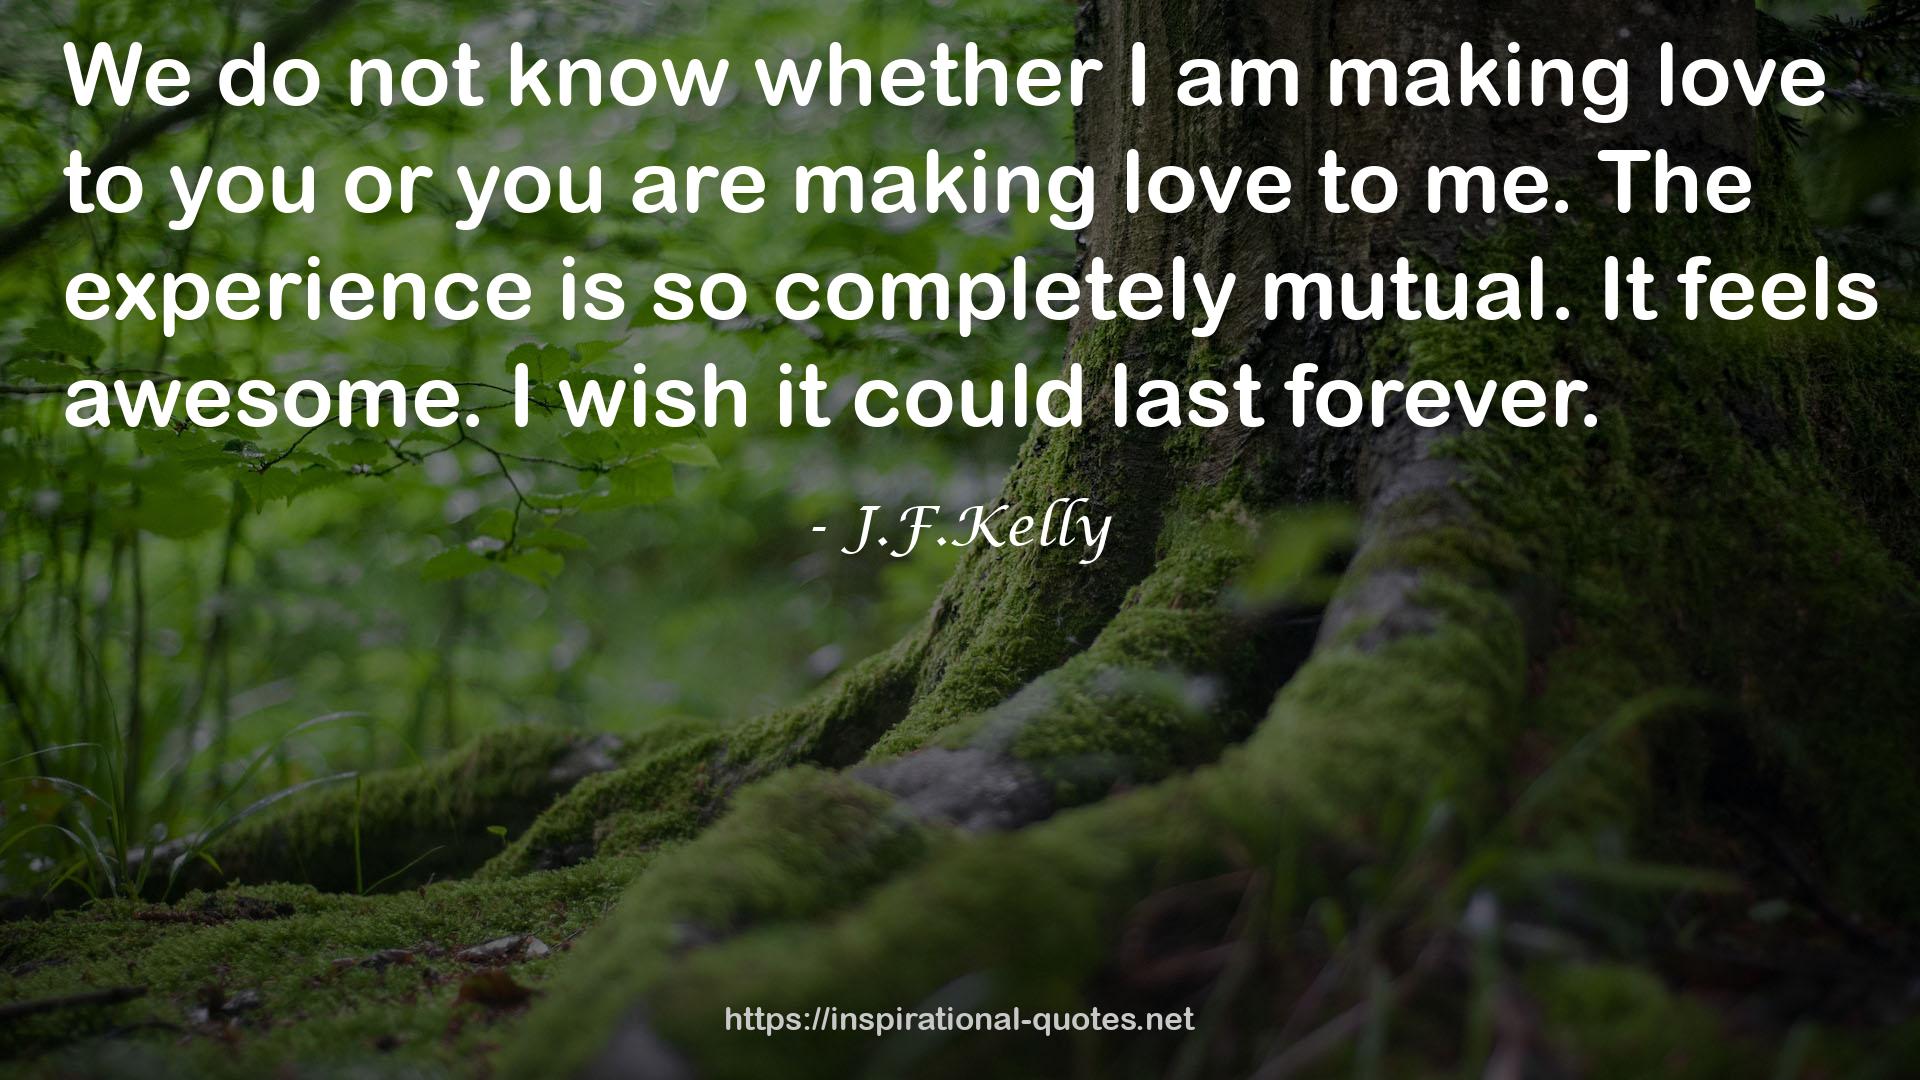 J.F.Kelly QUOTES